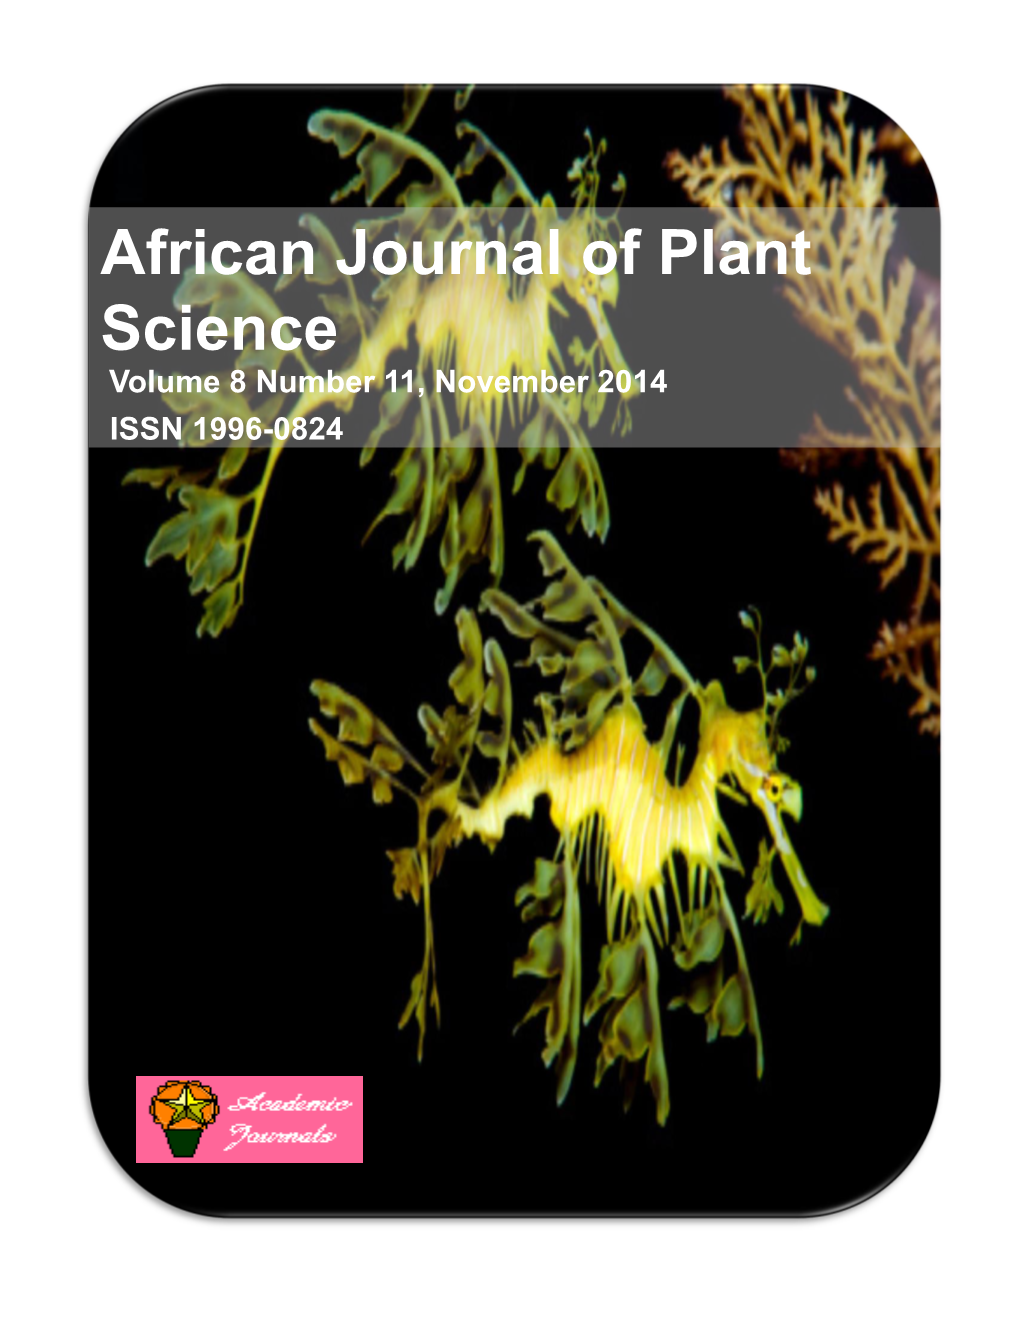 African Journal of Plant Science Volume 8 Number 11, November 2014 ISSN 1996-0824